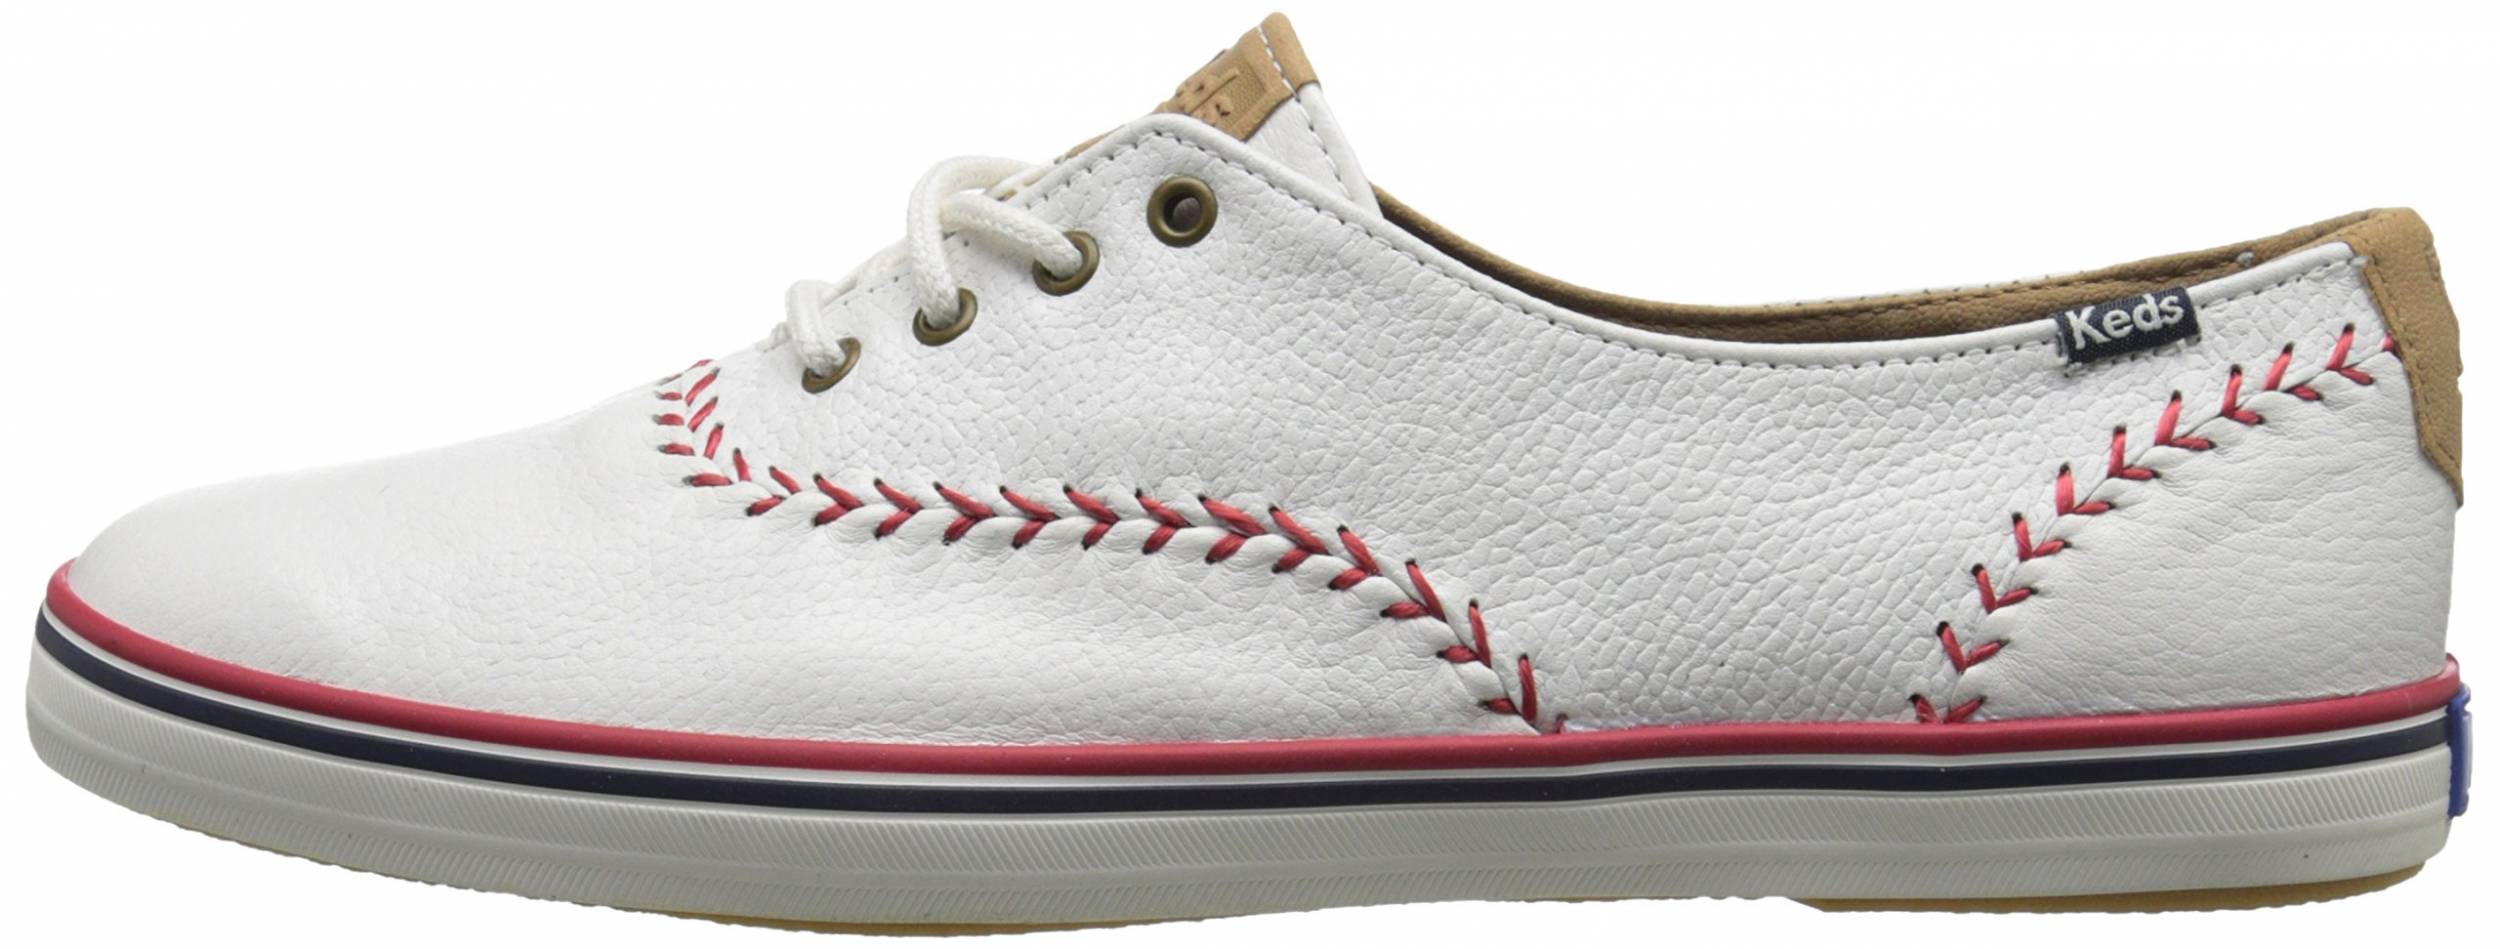 keds champion pennant leather